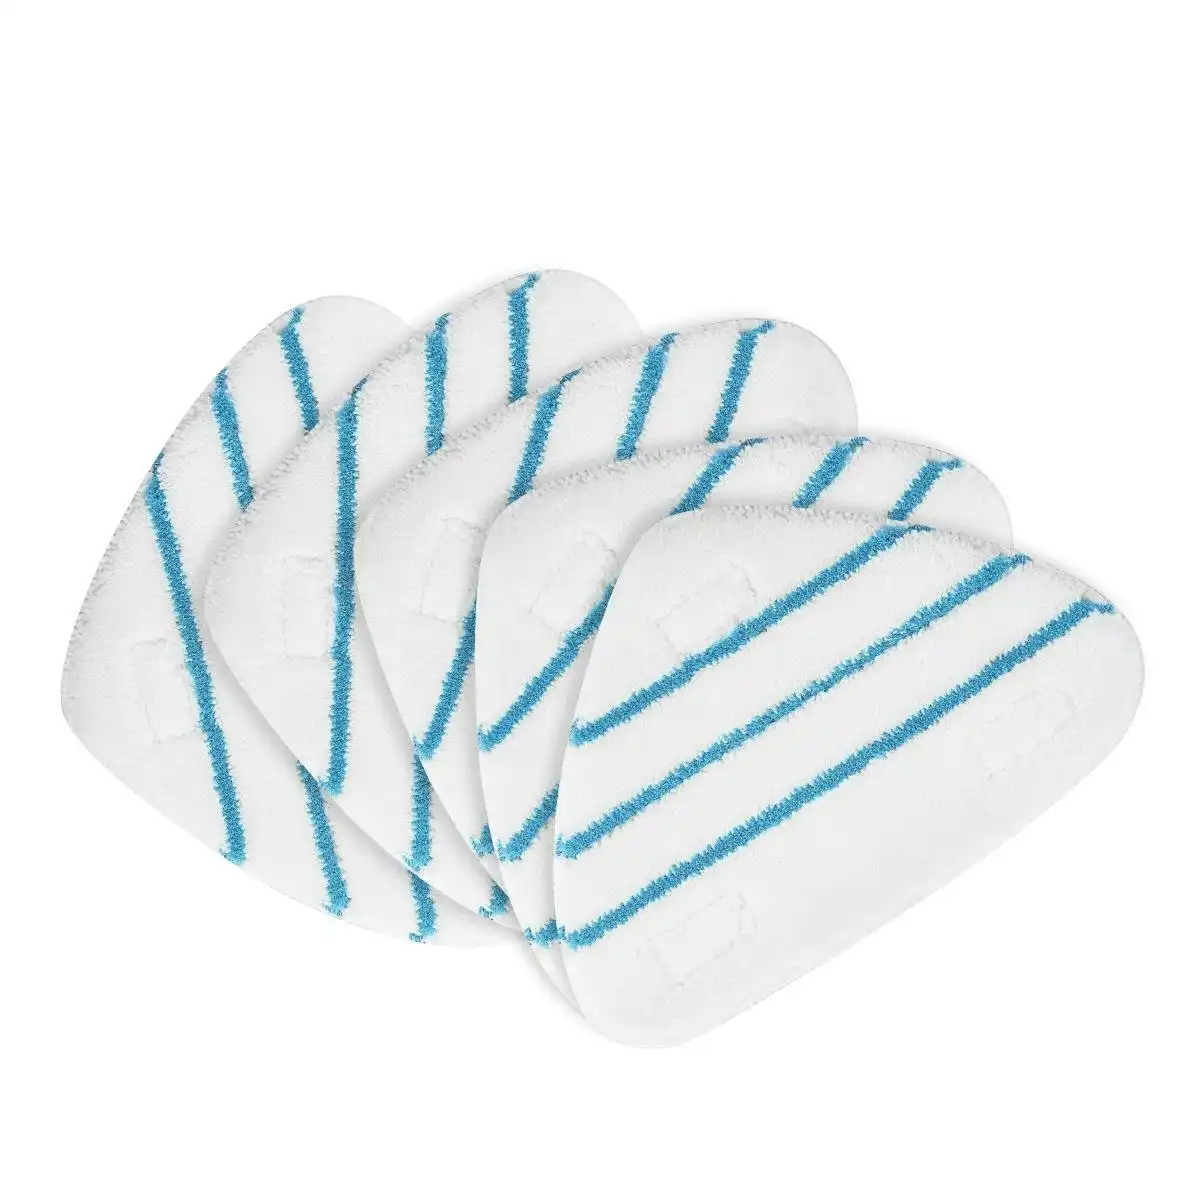 Maxkon  5 Pack Replacement Washable Microfiber Steam Mop Pads for 13-in-1 Steam Mop